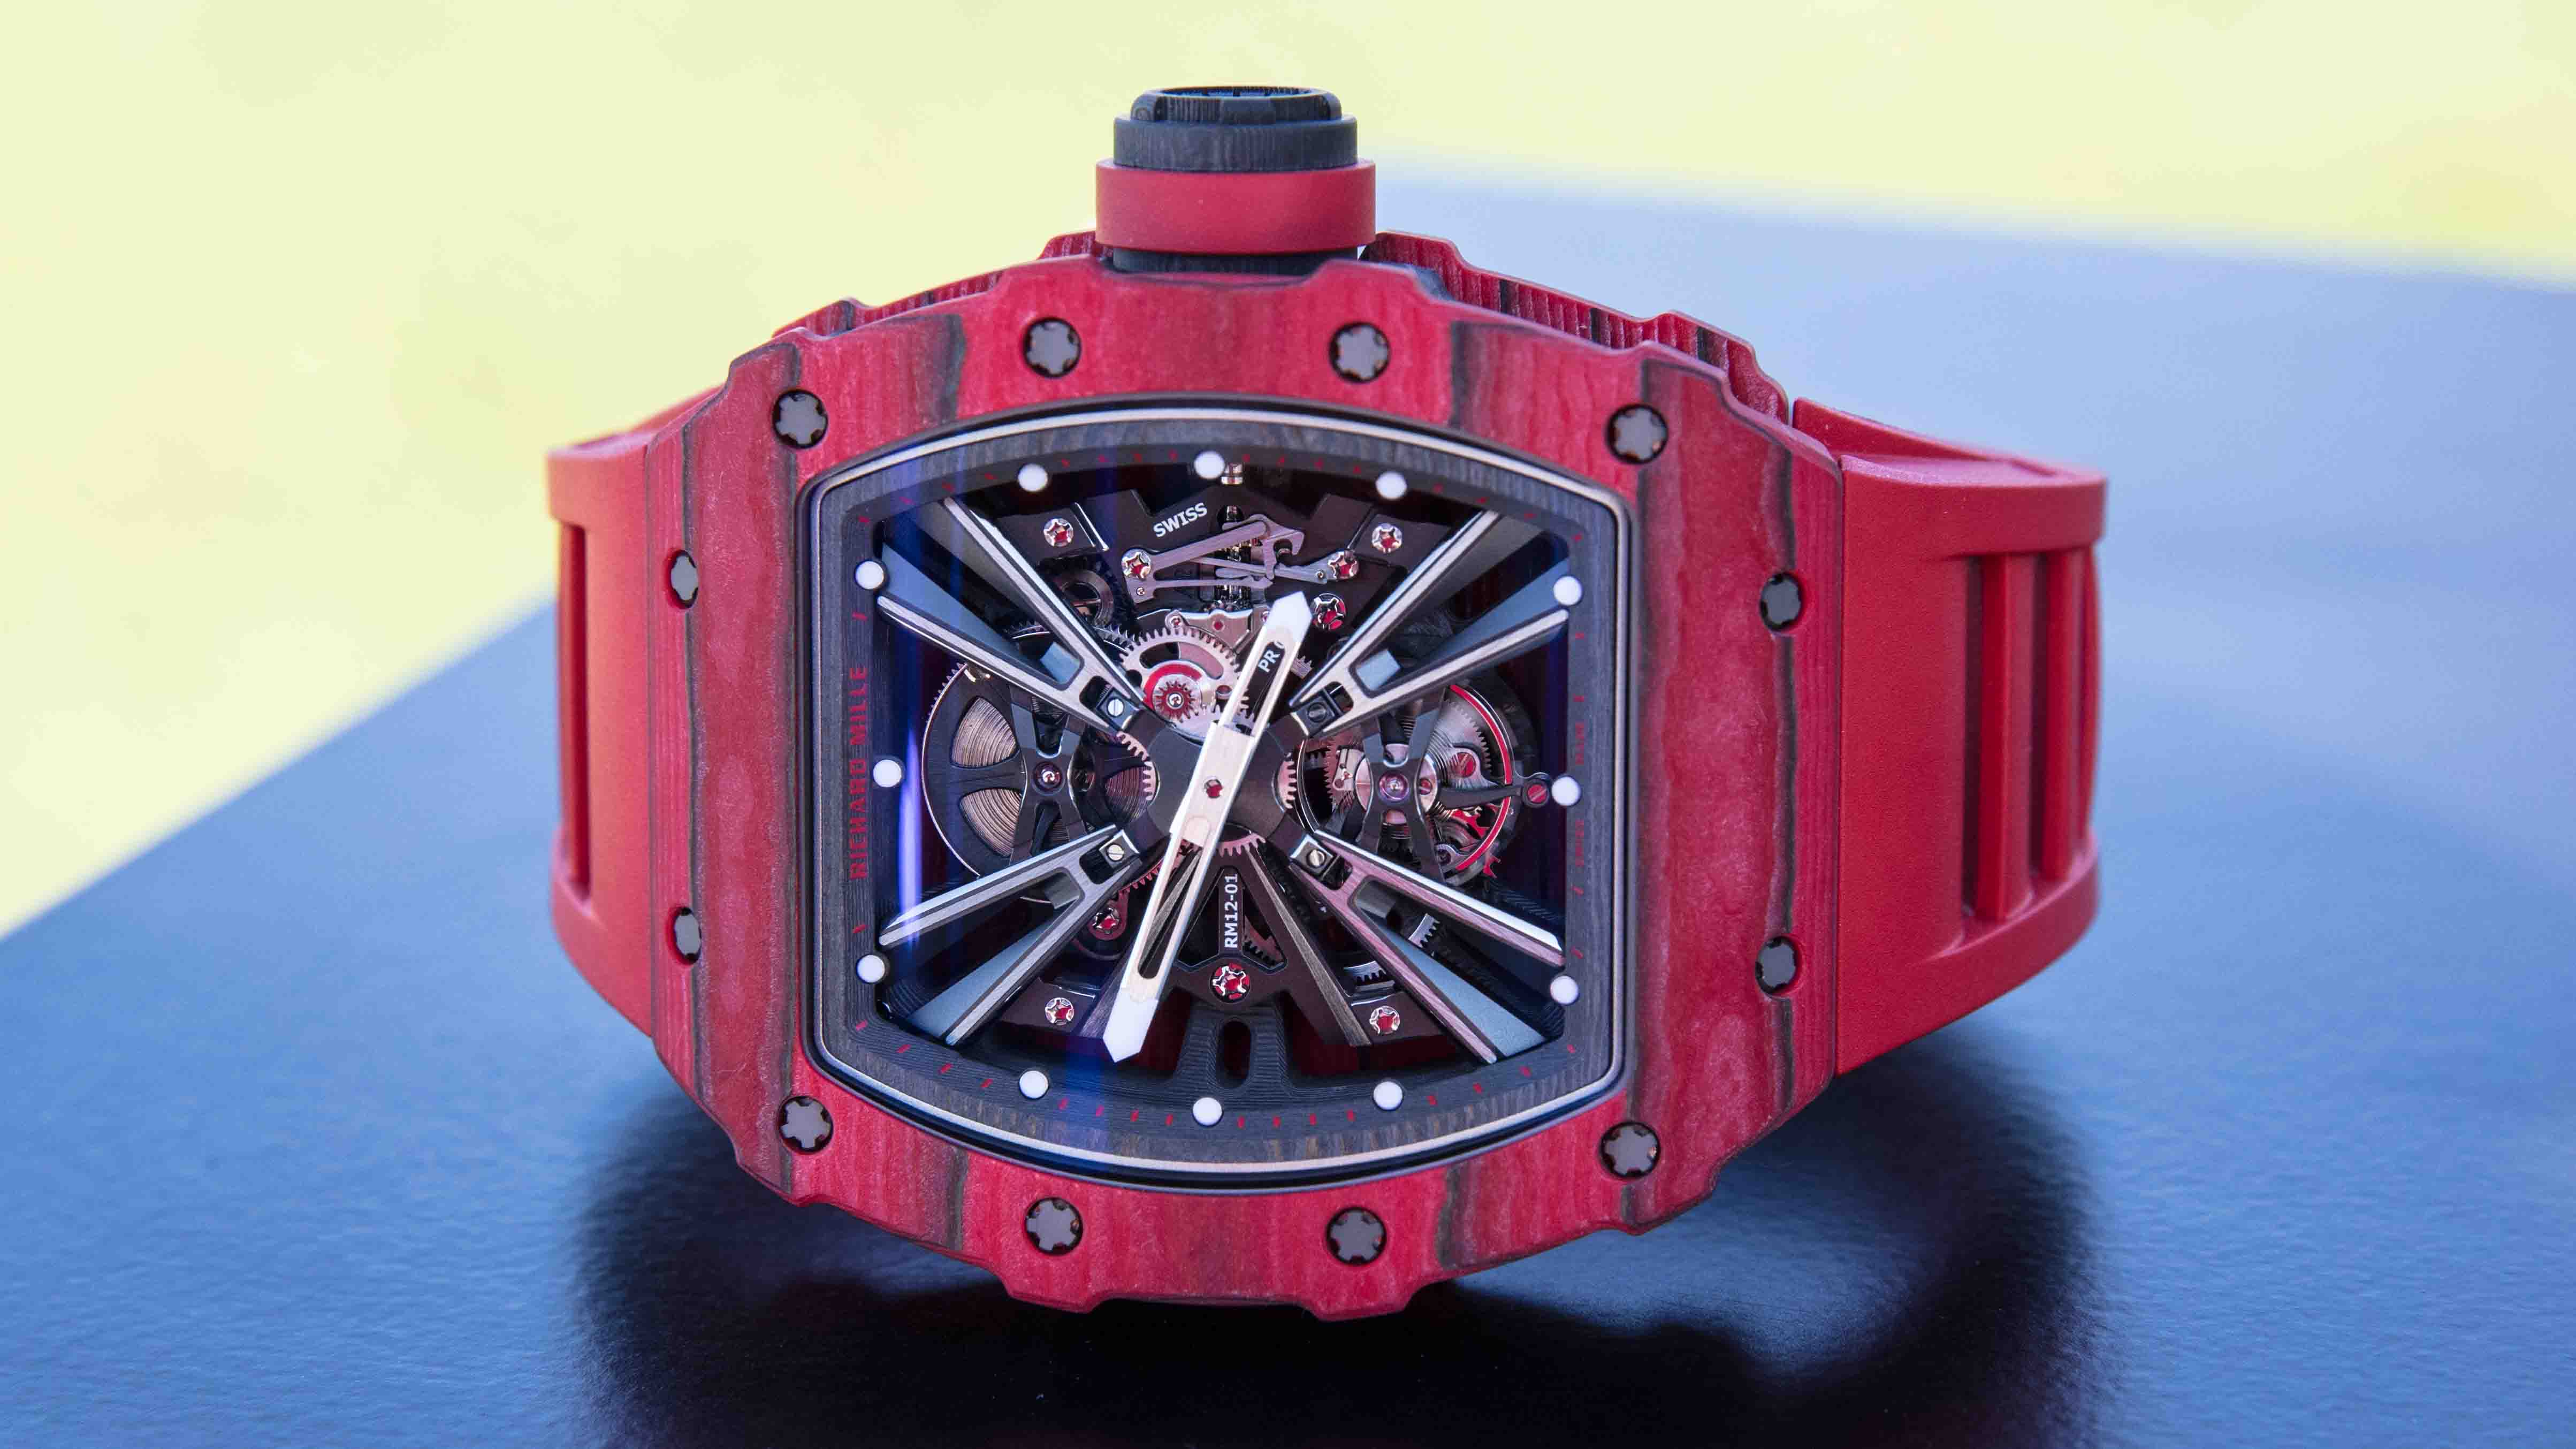 Introducing The New Richard Mille RM 12-01 Tourbillon Watch In The Hamptons At ‘The Bridge’